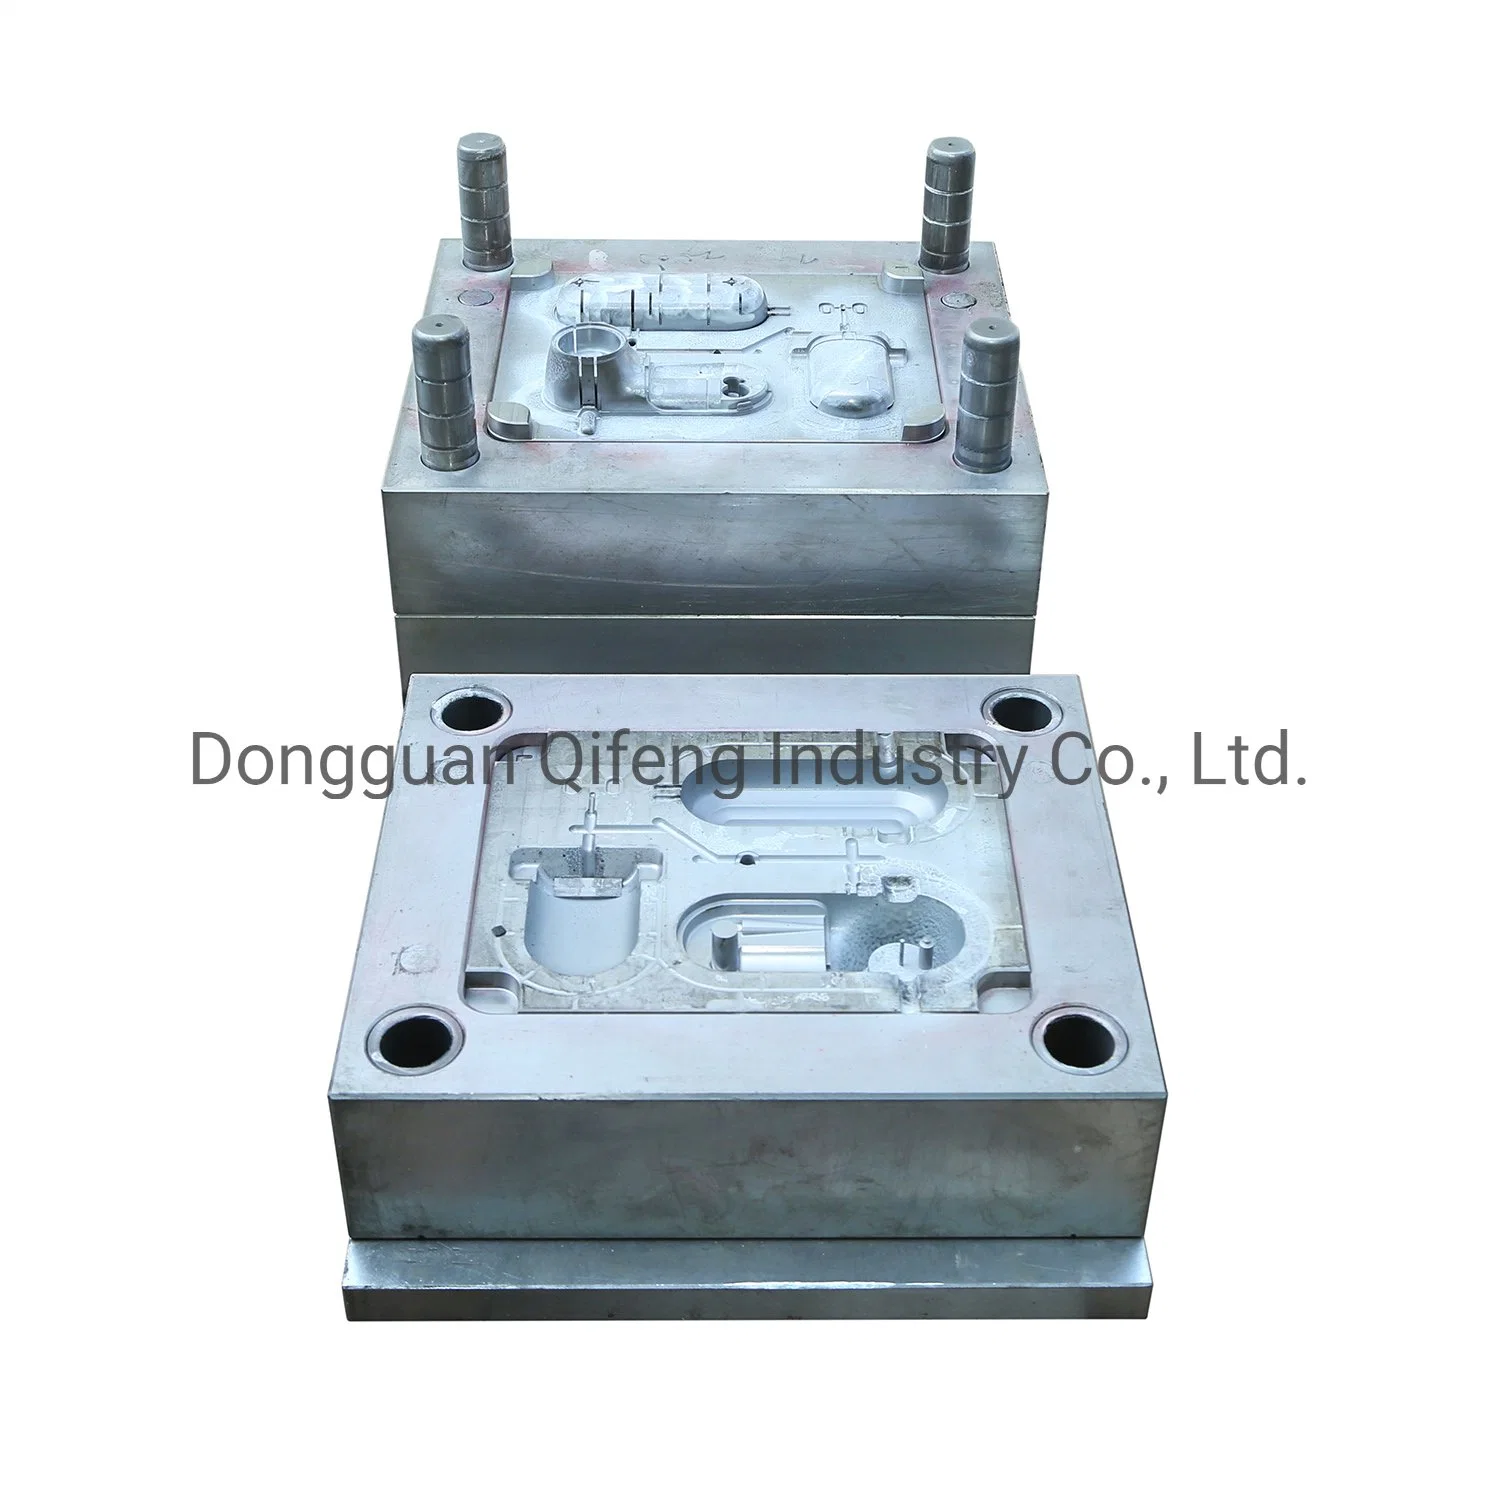 Customized Spare Part Plastic Injection Molding Company Supply Hotsales Injection Tooling Matrix Molds Consumer Products Extrusion Service and OEM Assembly